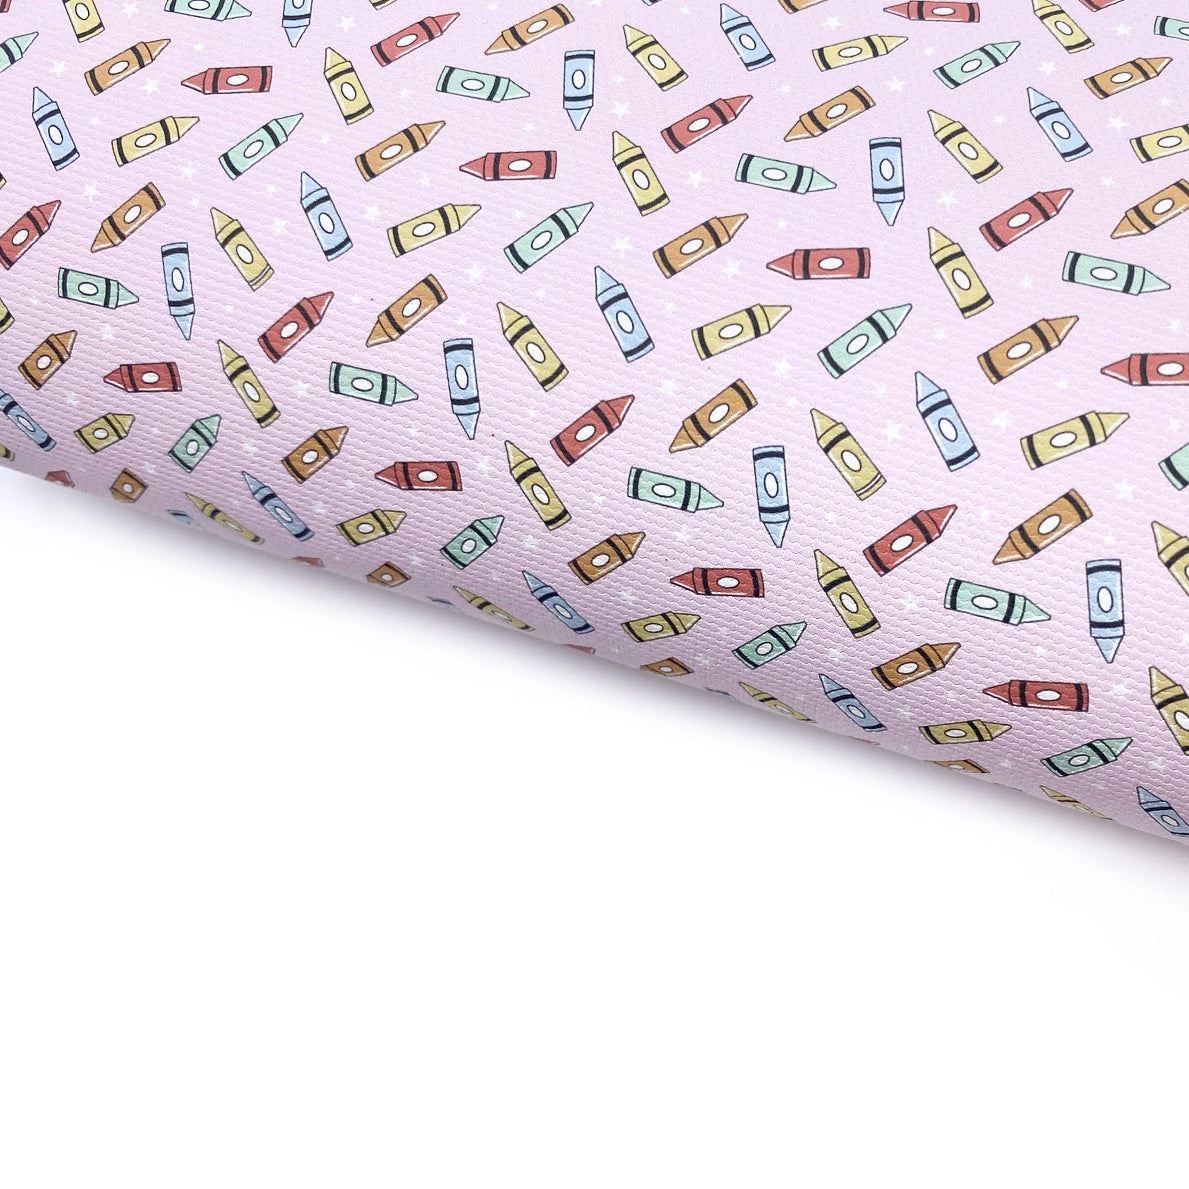 Crayons on Pink Lux Premium Printed Bow Fabric